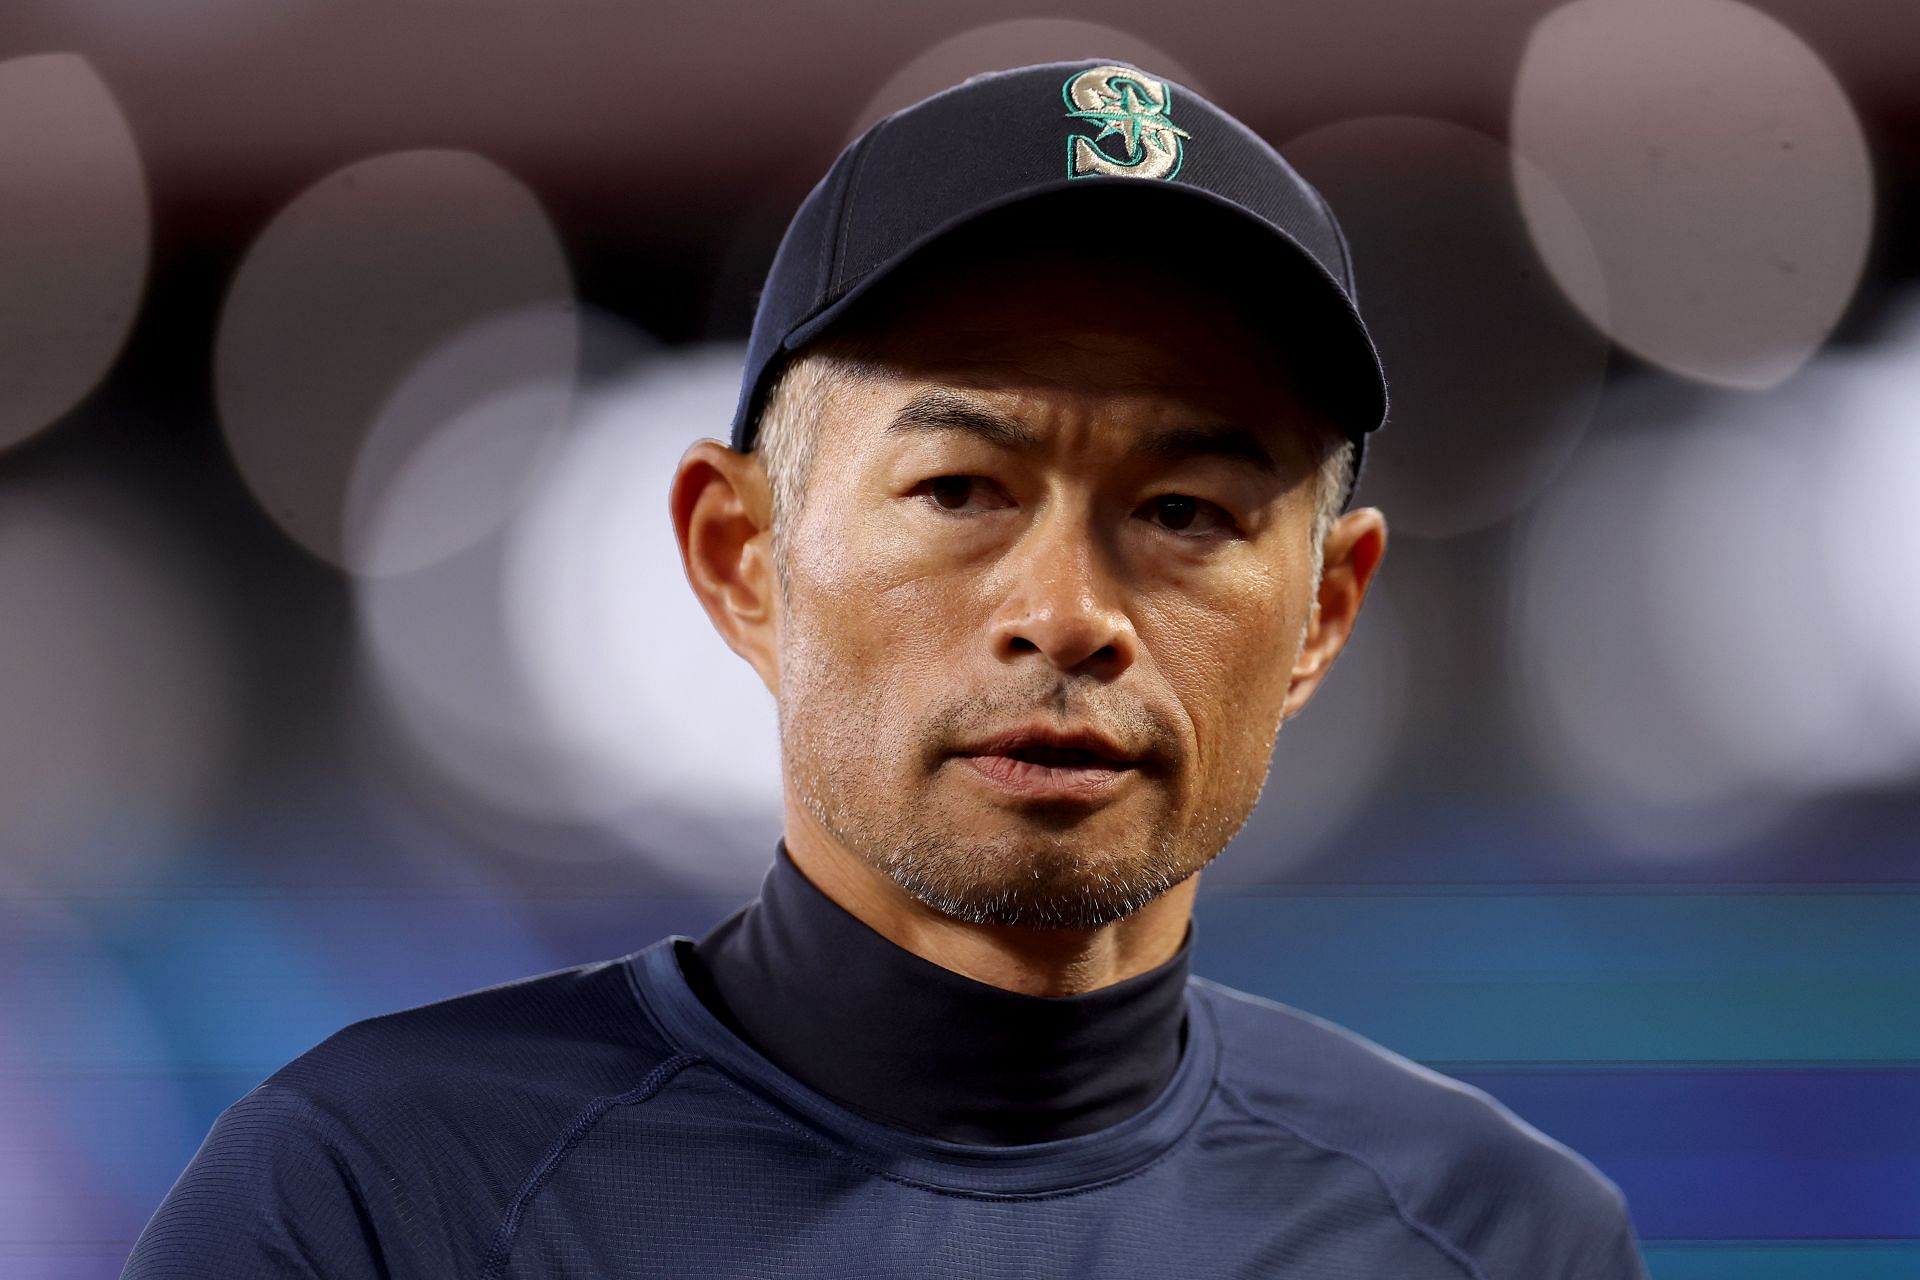 Ichiro Suzuki once patched things up with his wife after a sex scandal with a Japanese housewife image image